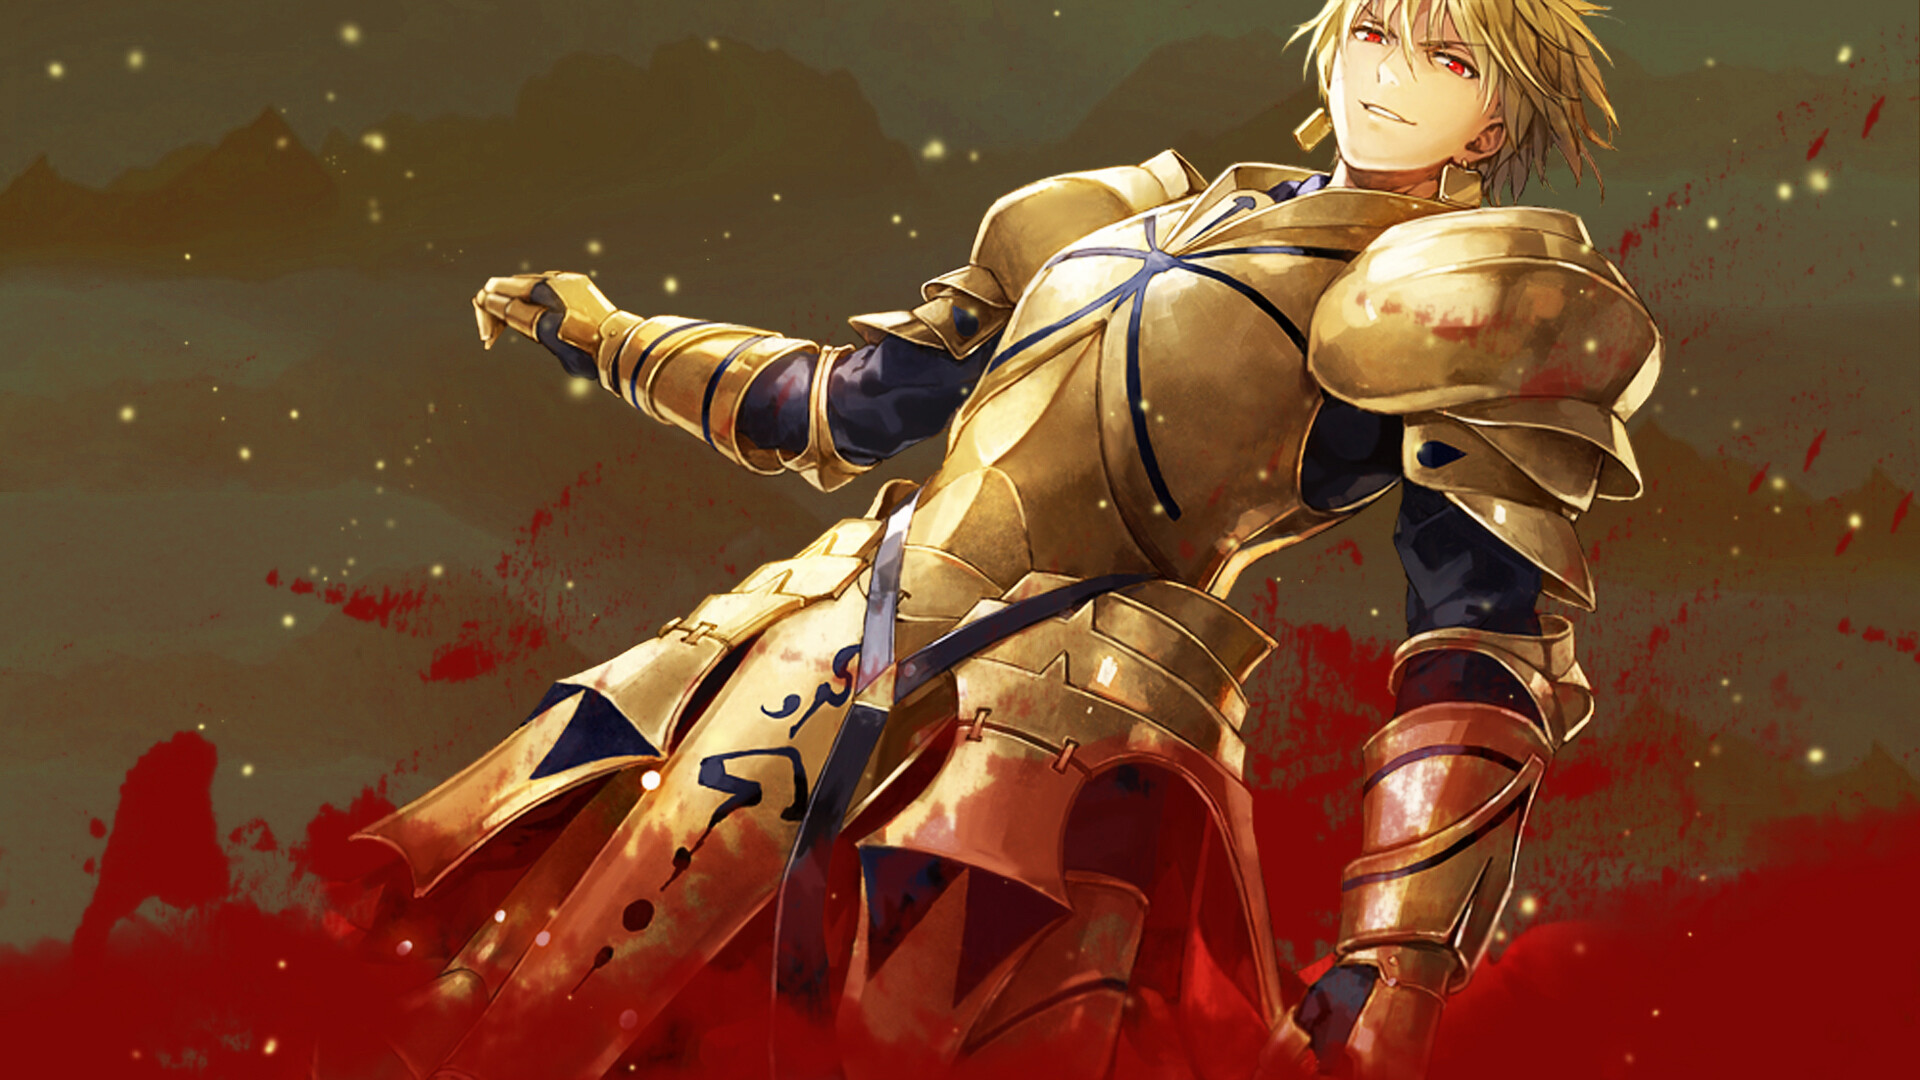 Gilgamesh (Fate/Zero): Golden King, The strongest of men, The personification of all human virtues, Brave warrior. 1920x1080 Full HD Wallpaper.